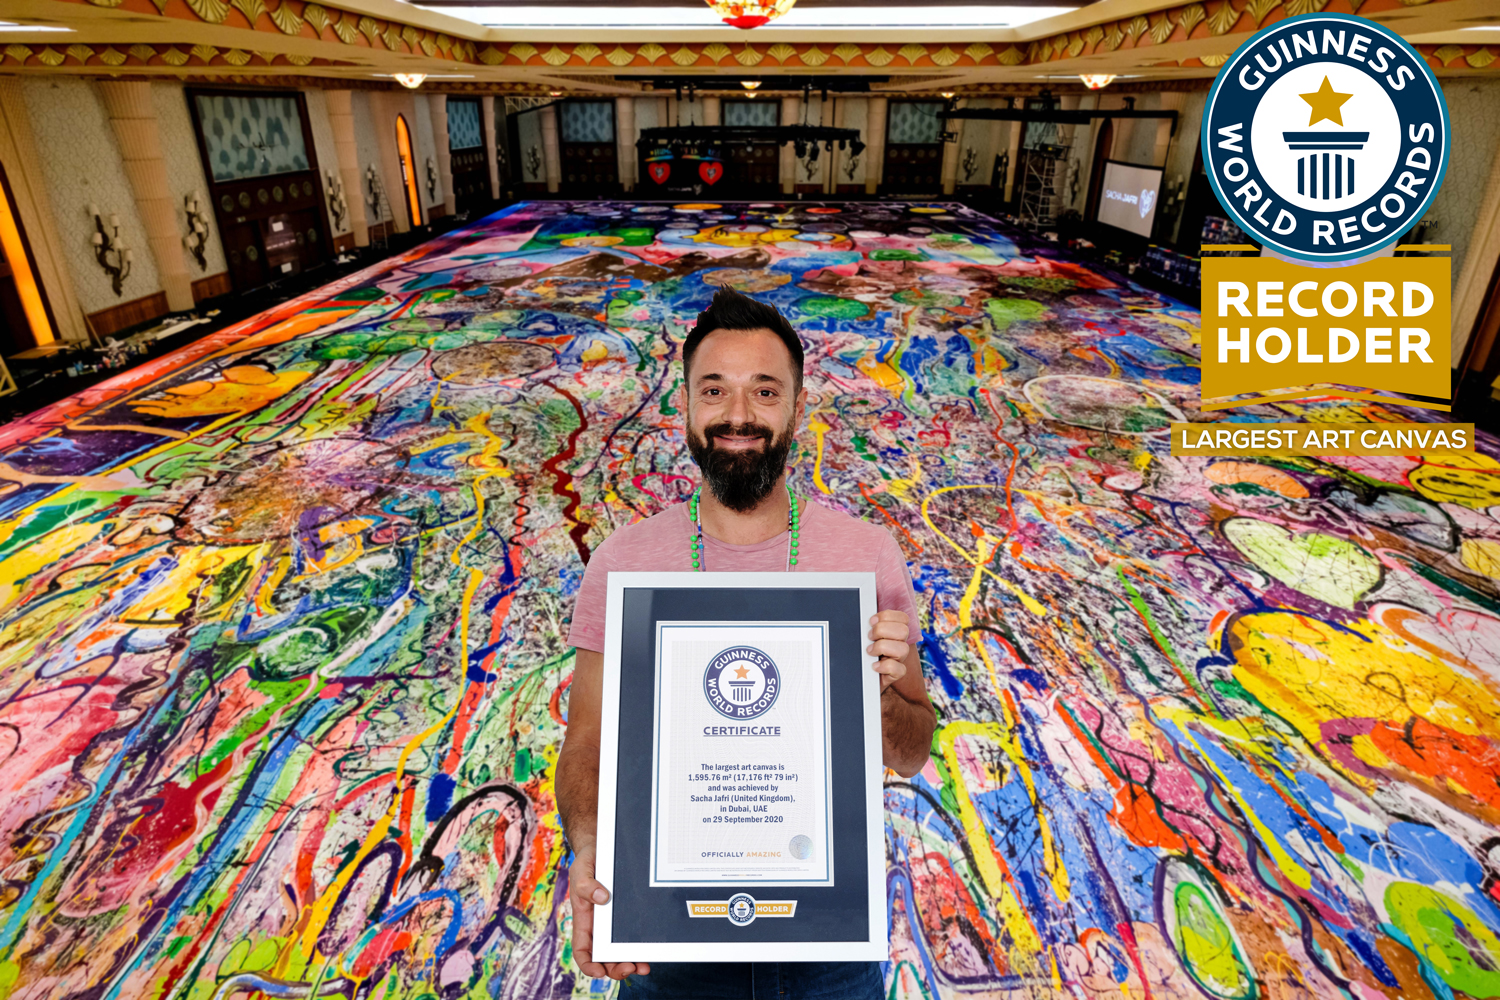 Atlantis, The Palm canvas painting bags world record as world's largest -  News - HOTELIER MIDDLE EAST